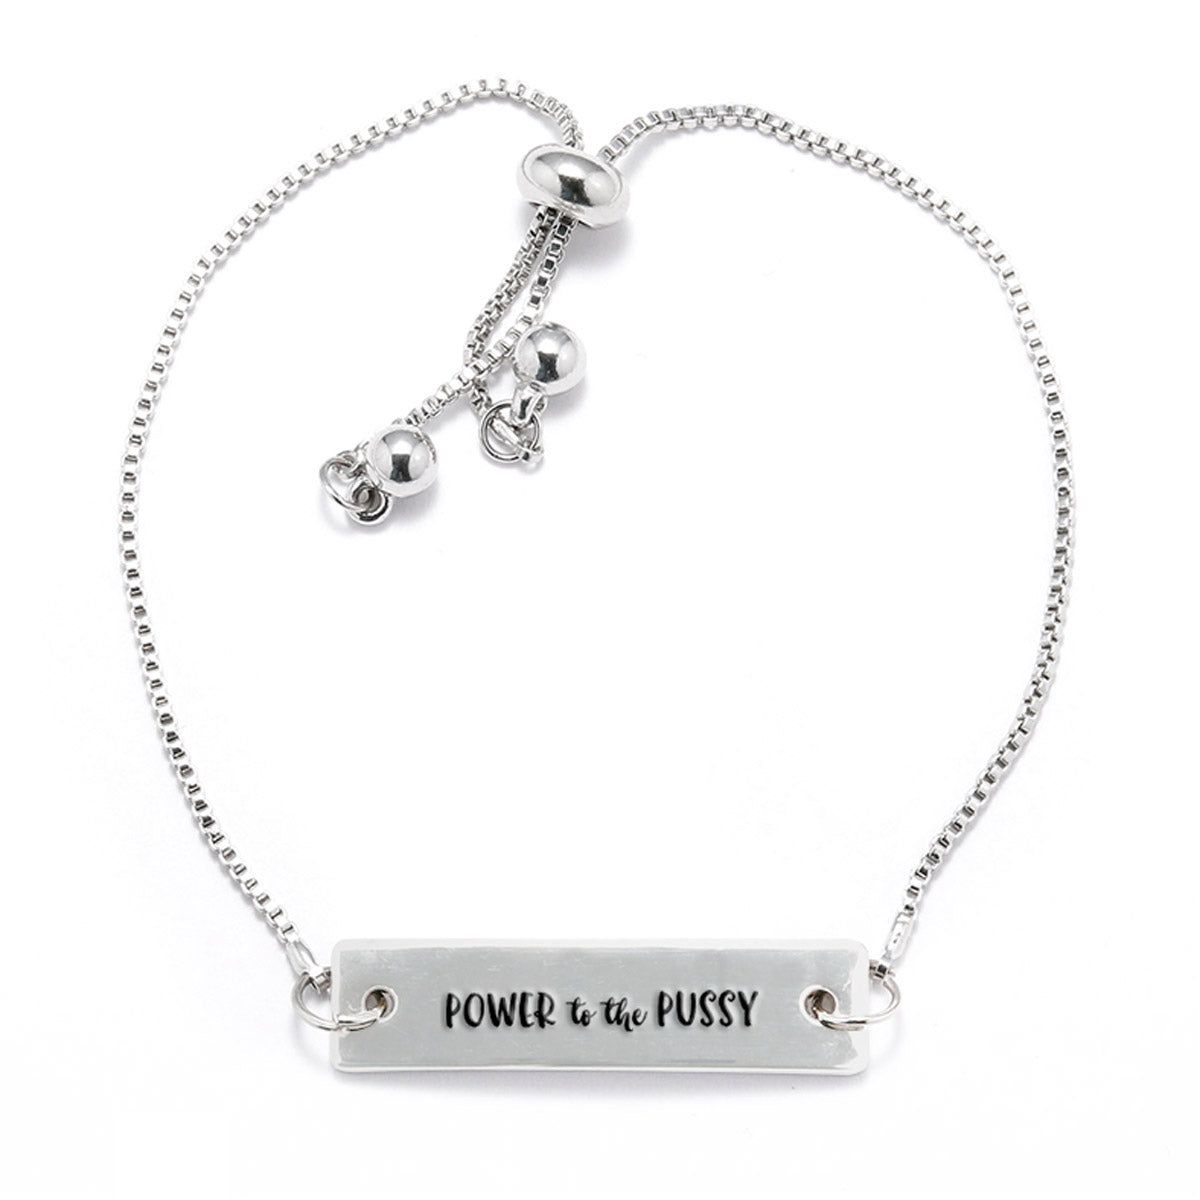 Power to the Pussy Silver Bar Adjustable Bracelet - pipercleo.com